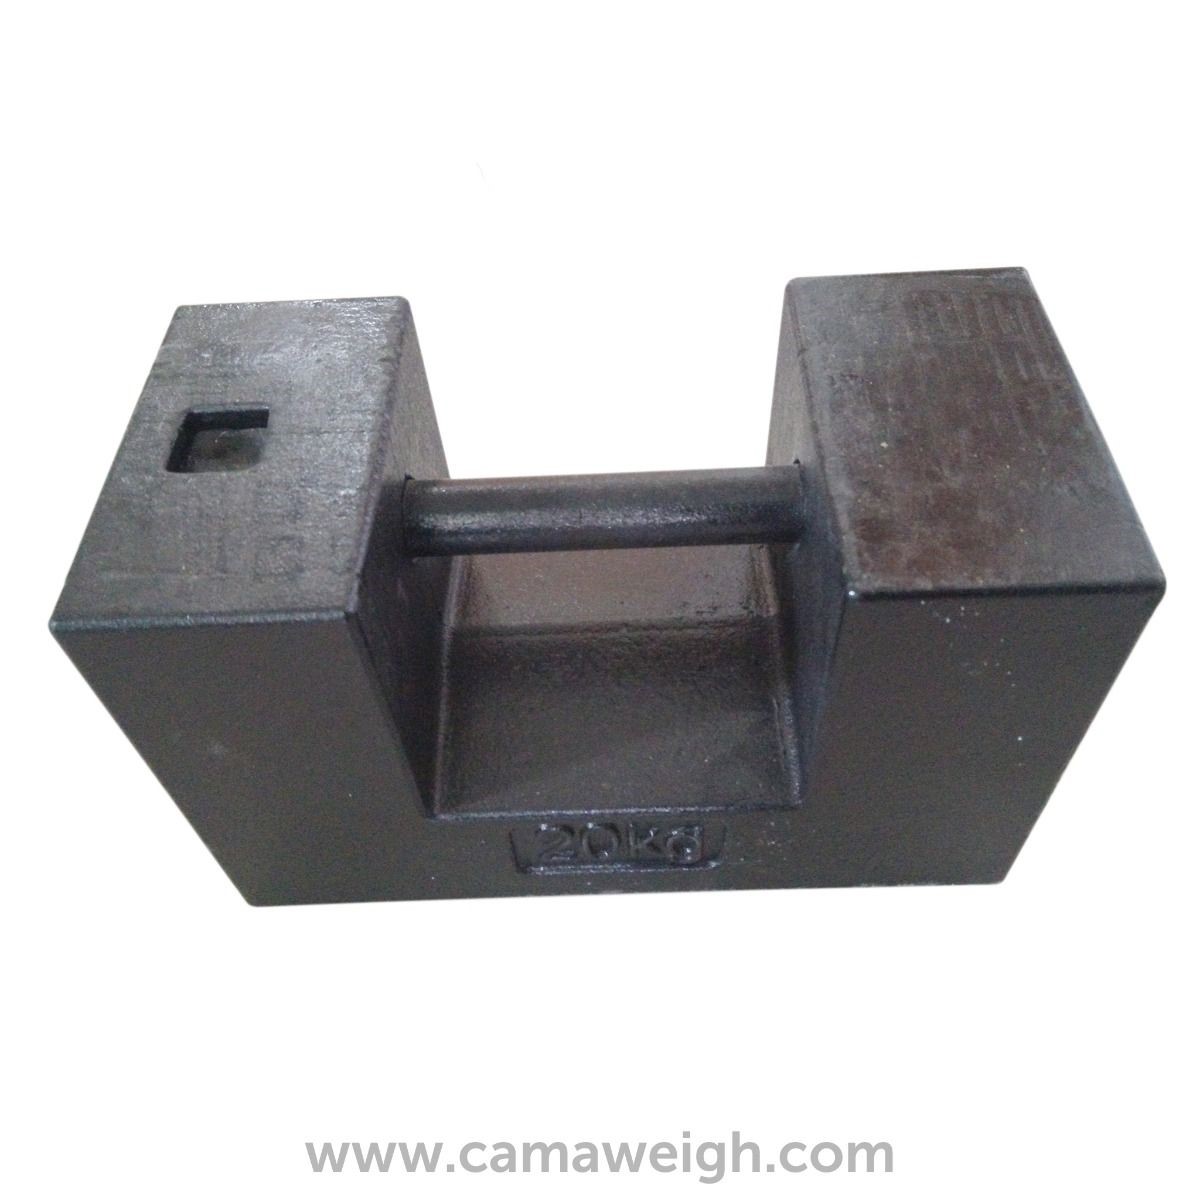 A 20 KG Cast Iron Test Weight Listed at Camaweigh for Sale